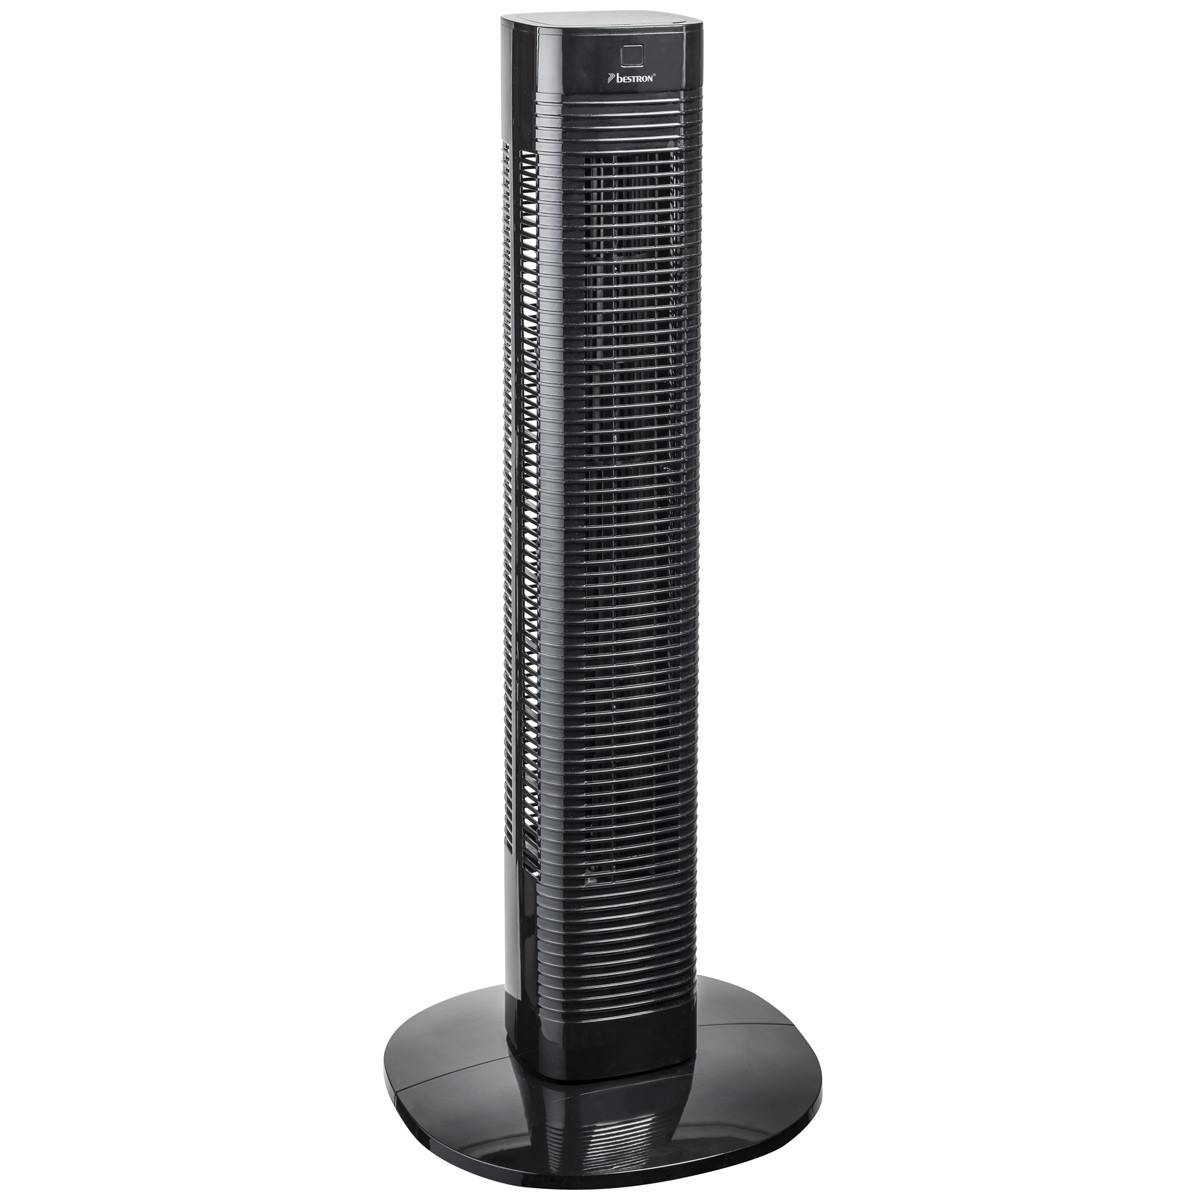 Bestron Aft80zrc Tower Fan With Remote Control And Digital Timer intended for dimensions 1200 X 1200